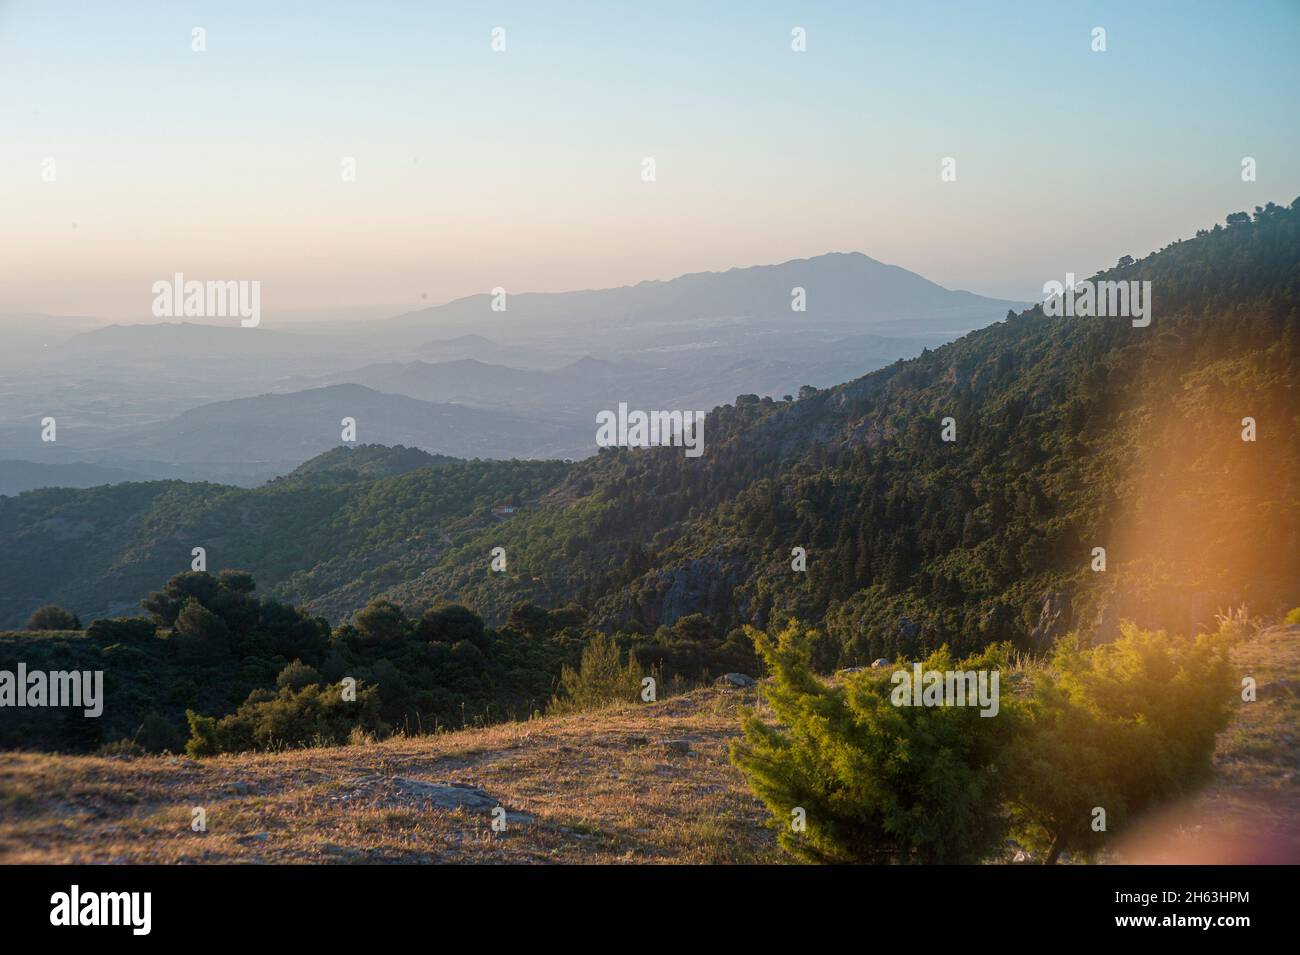 hiking around at mirador de luis ceballos to find the best spot to enjoy the spectacular sunrise in the sierra de las nieves nationalpark,near yungquera,andalusia,spain Stock Photo